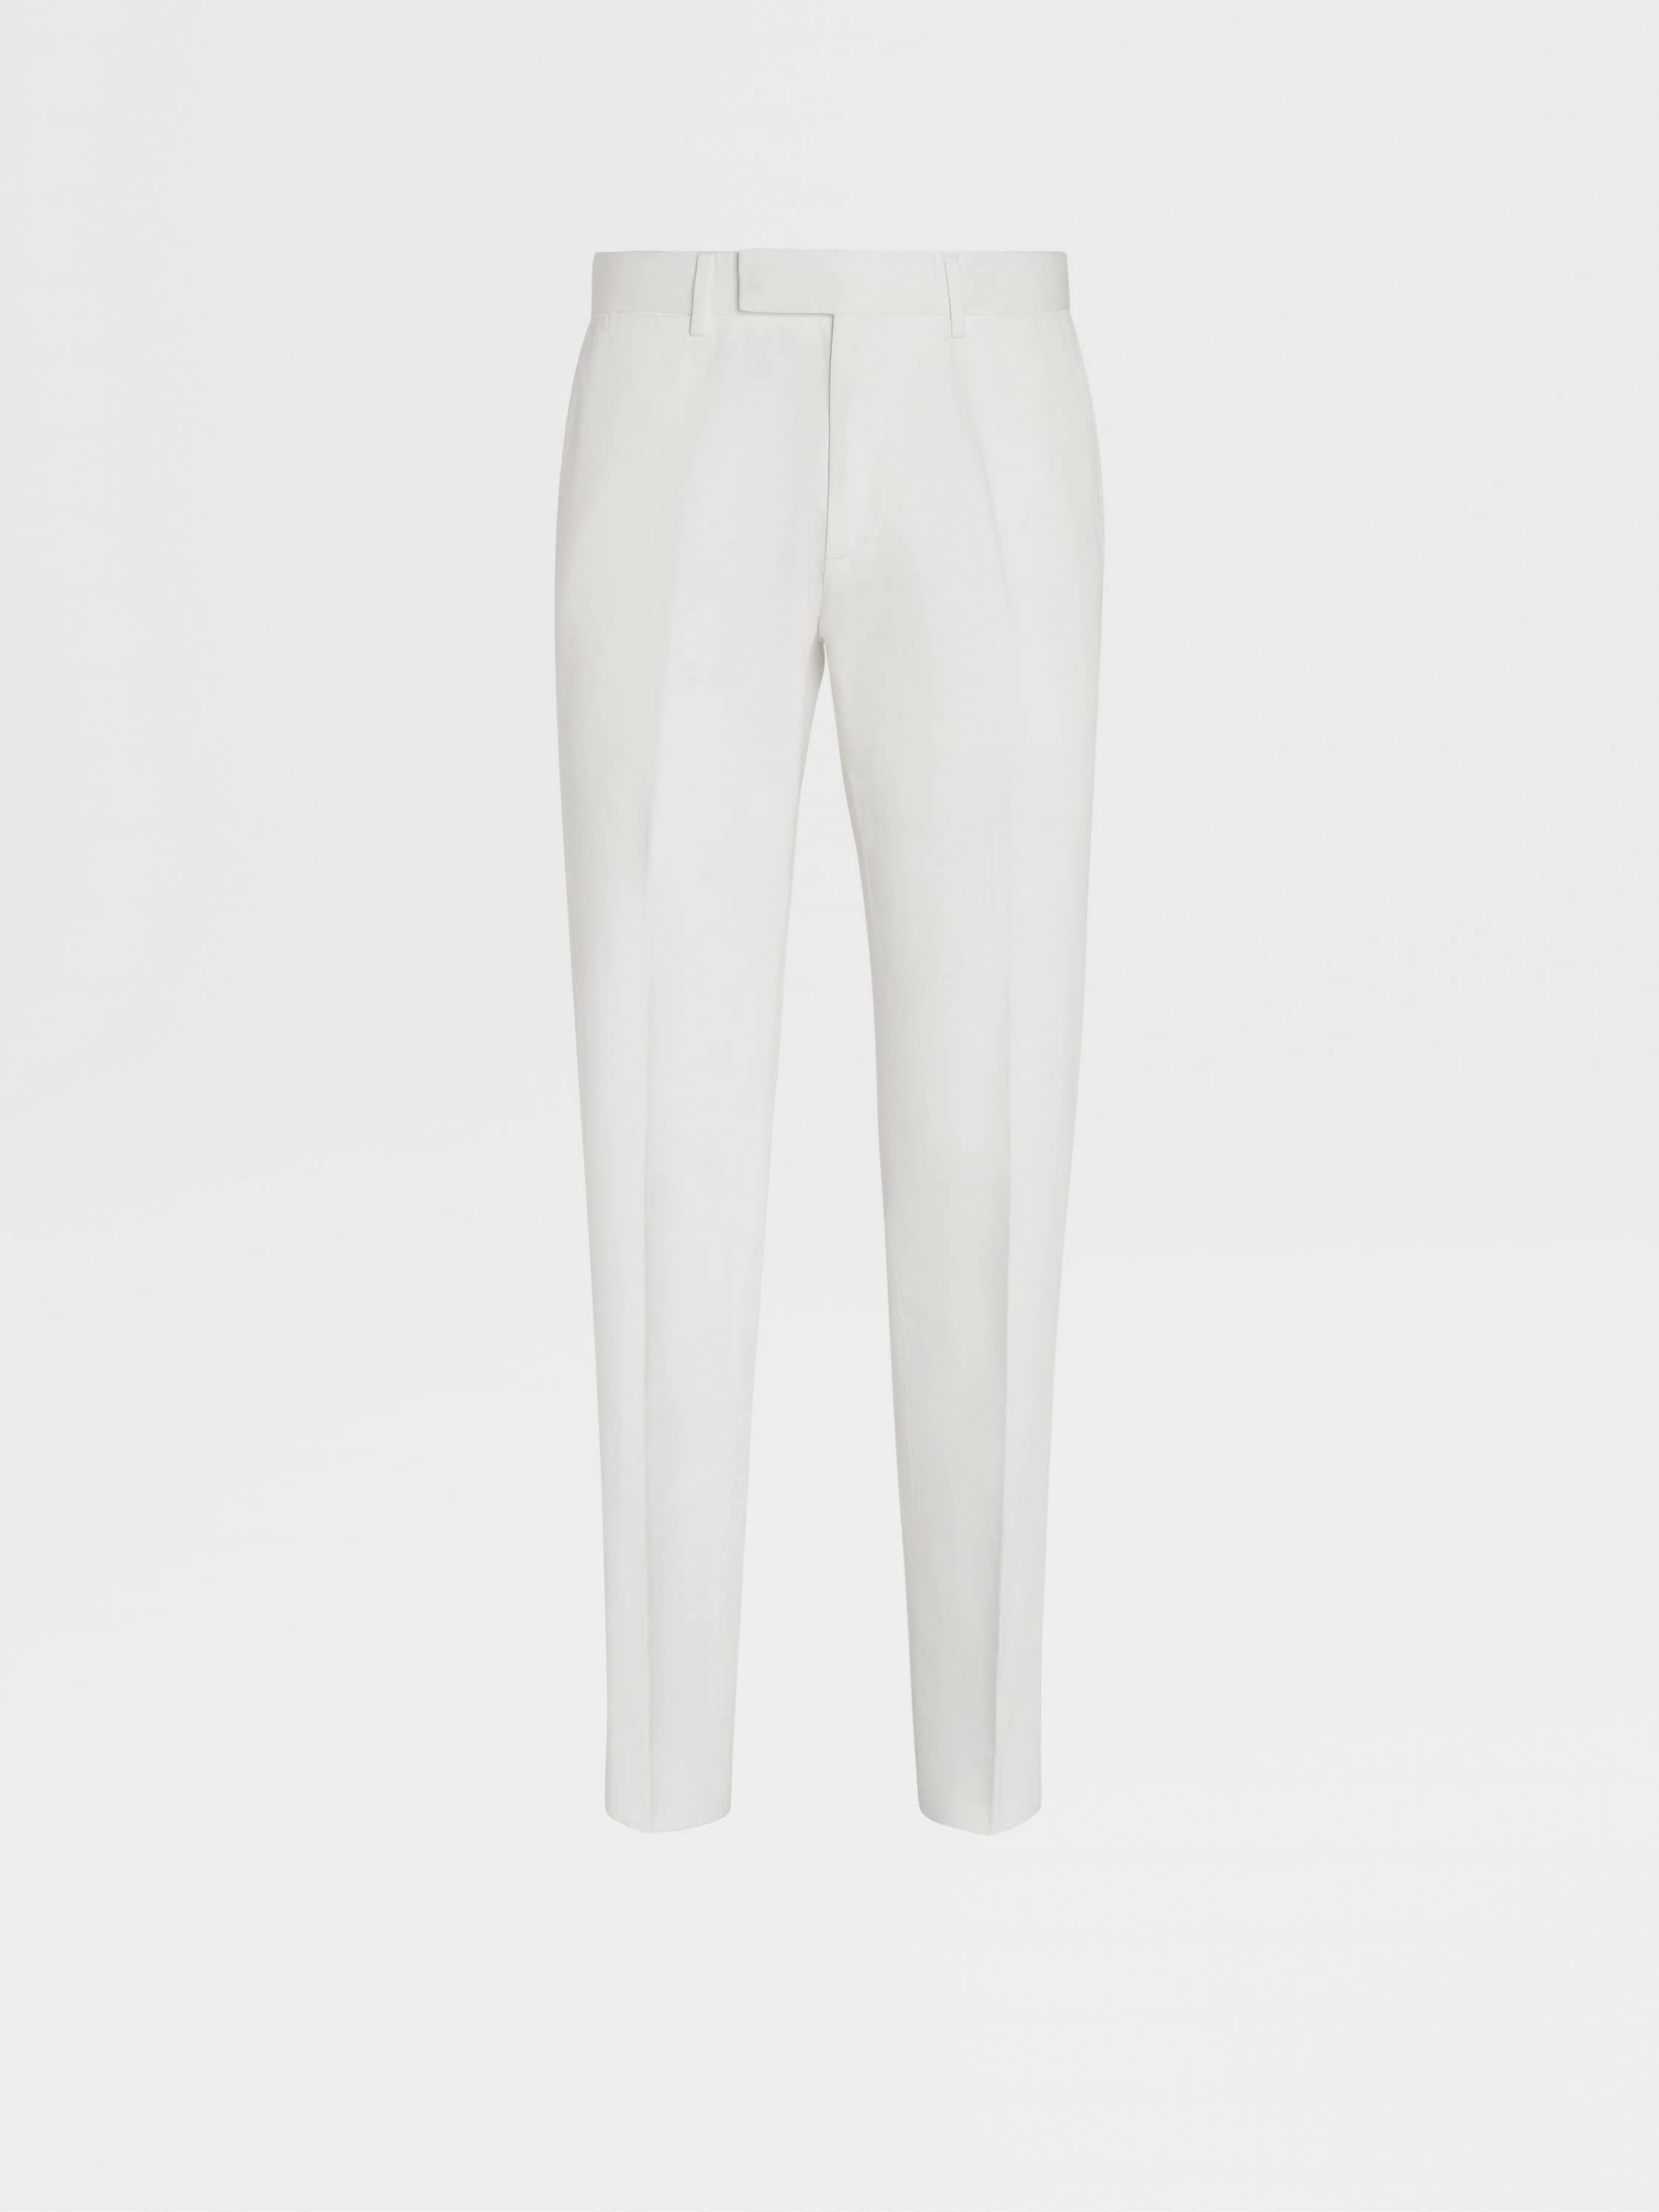 White Summer Chino Cotton and Linen Pants